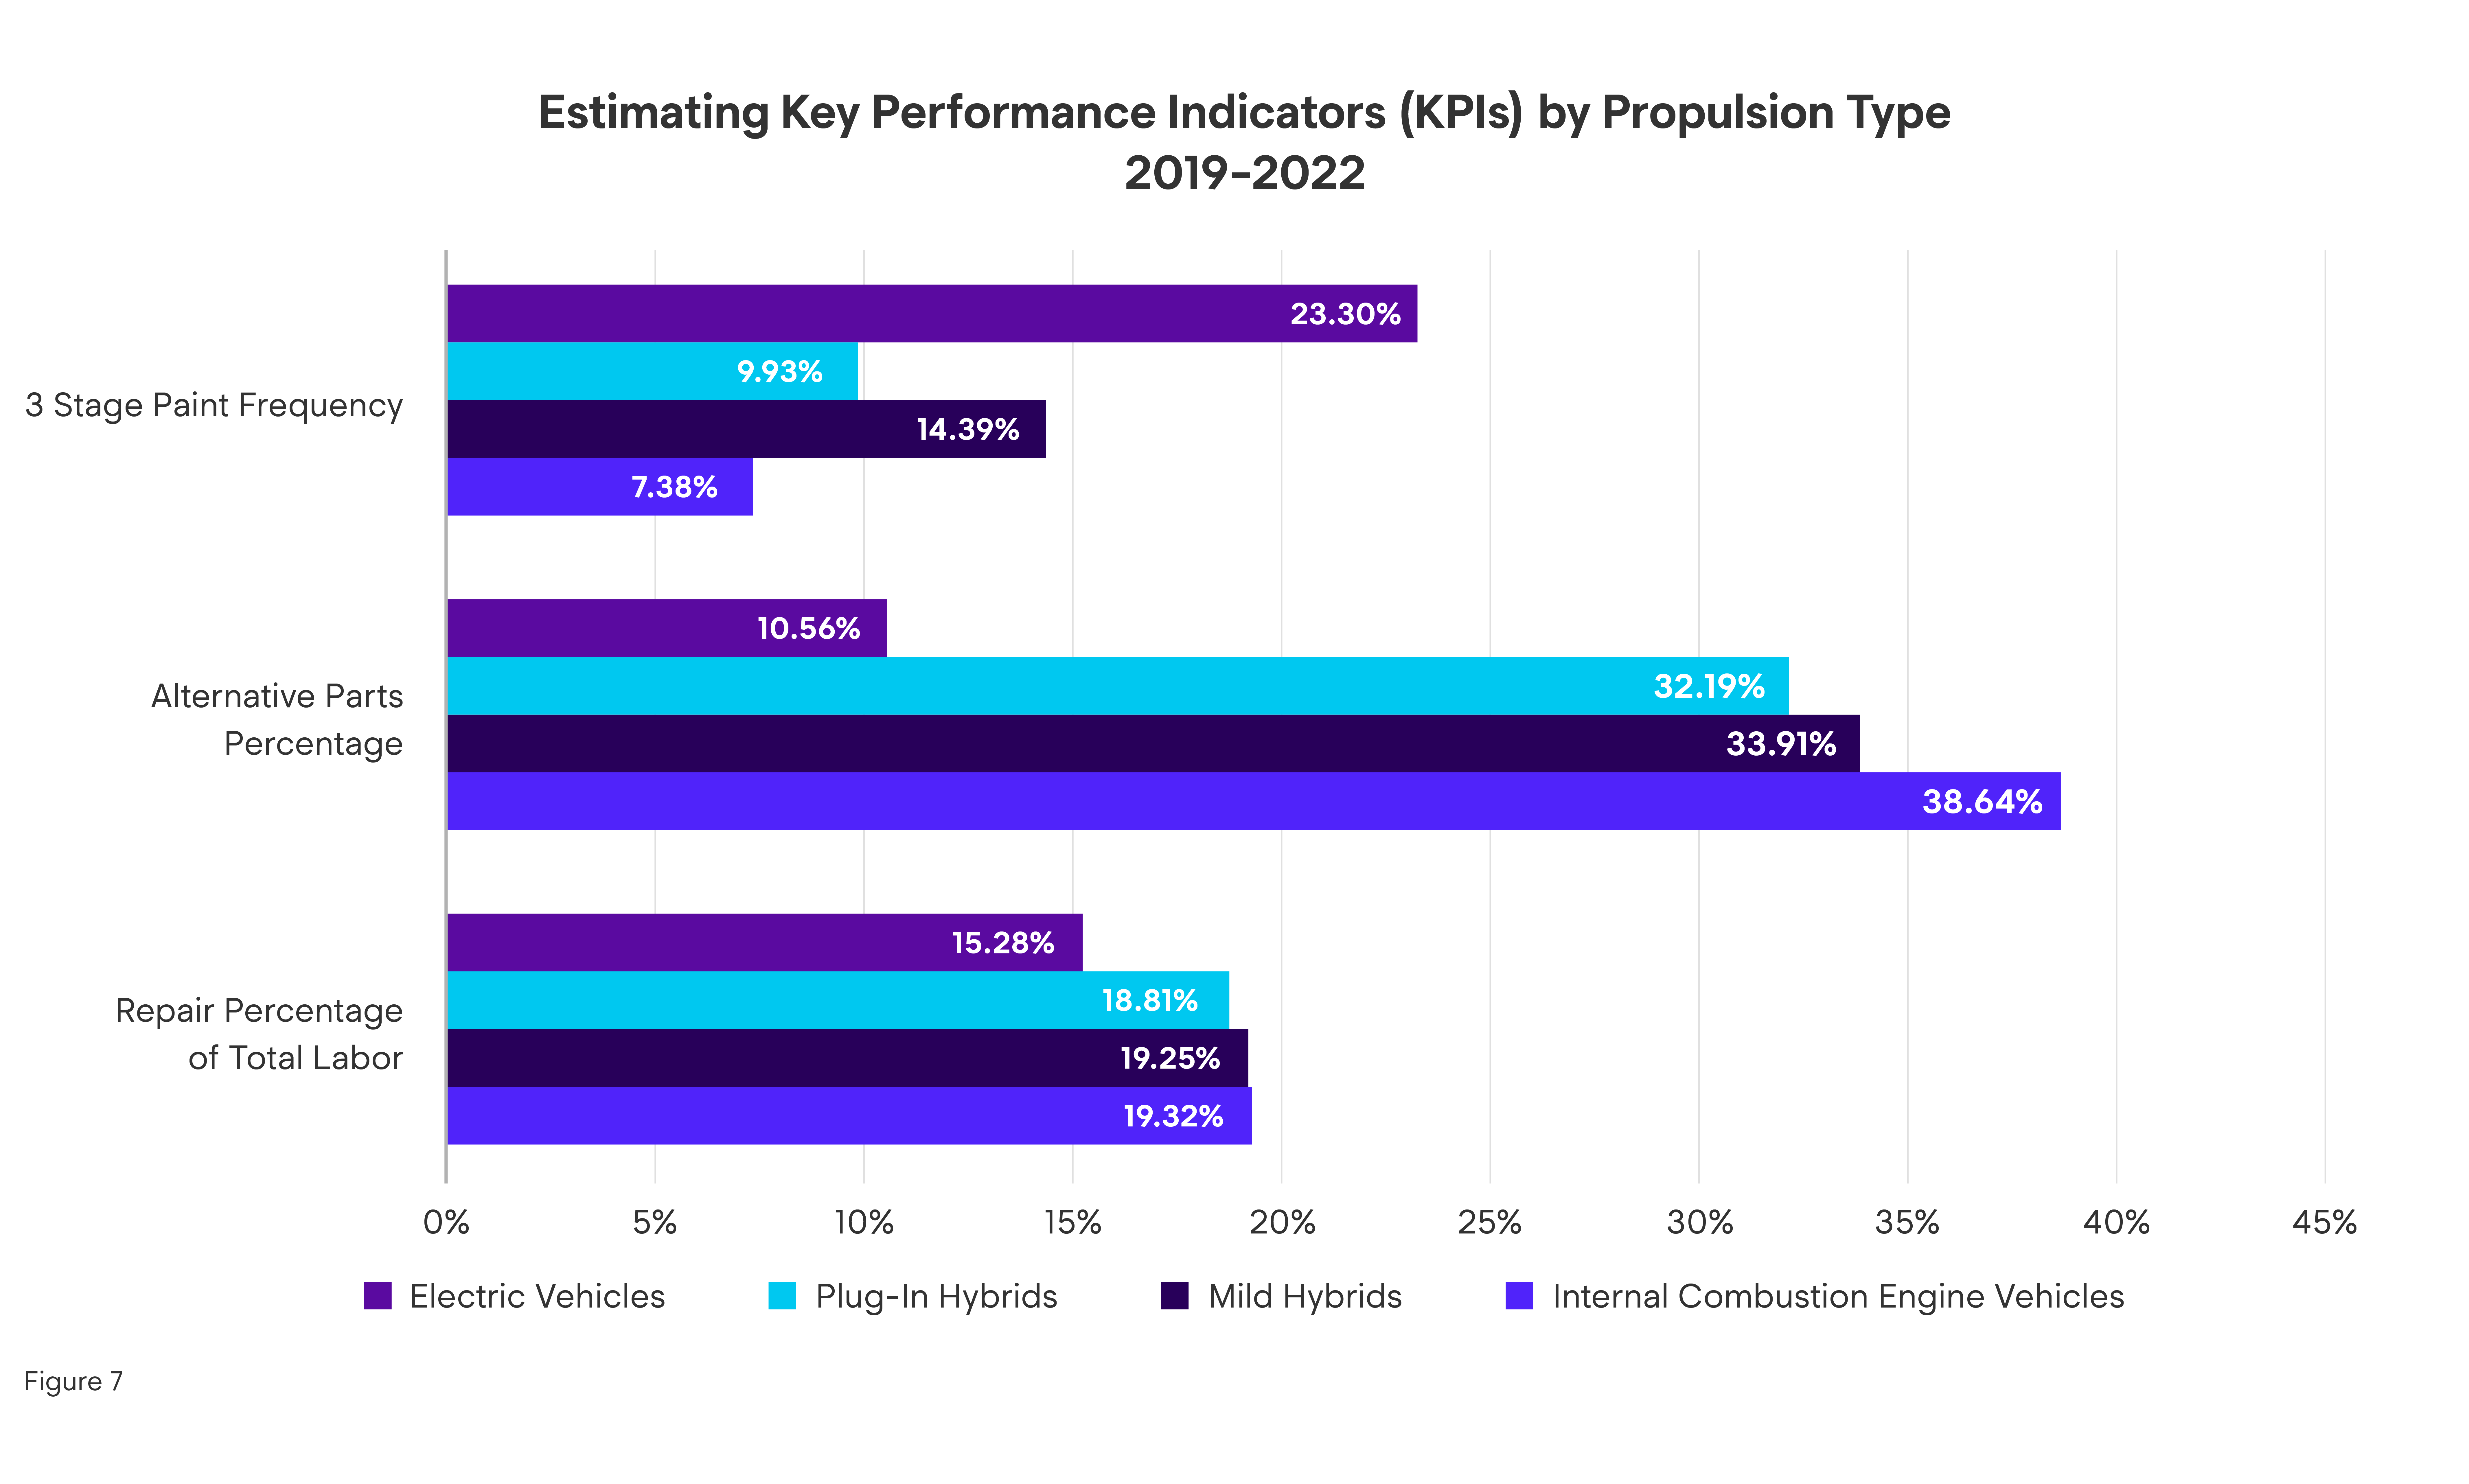 Estimating KPIs by Propulsion Type